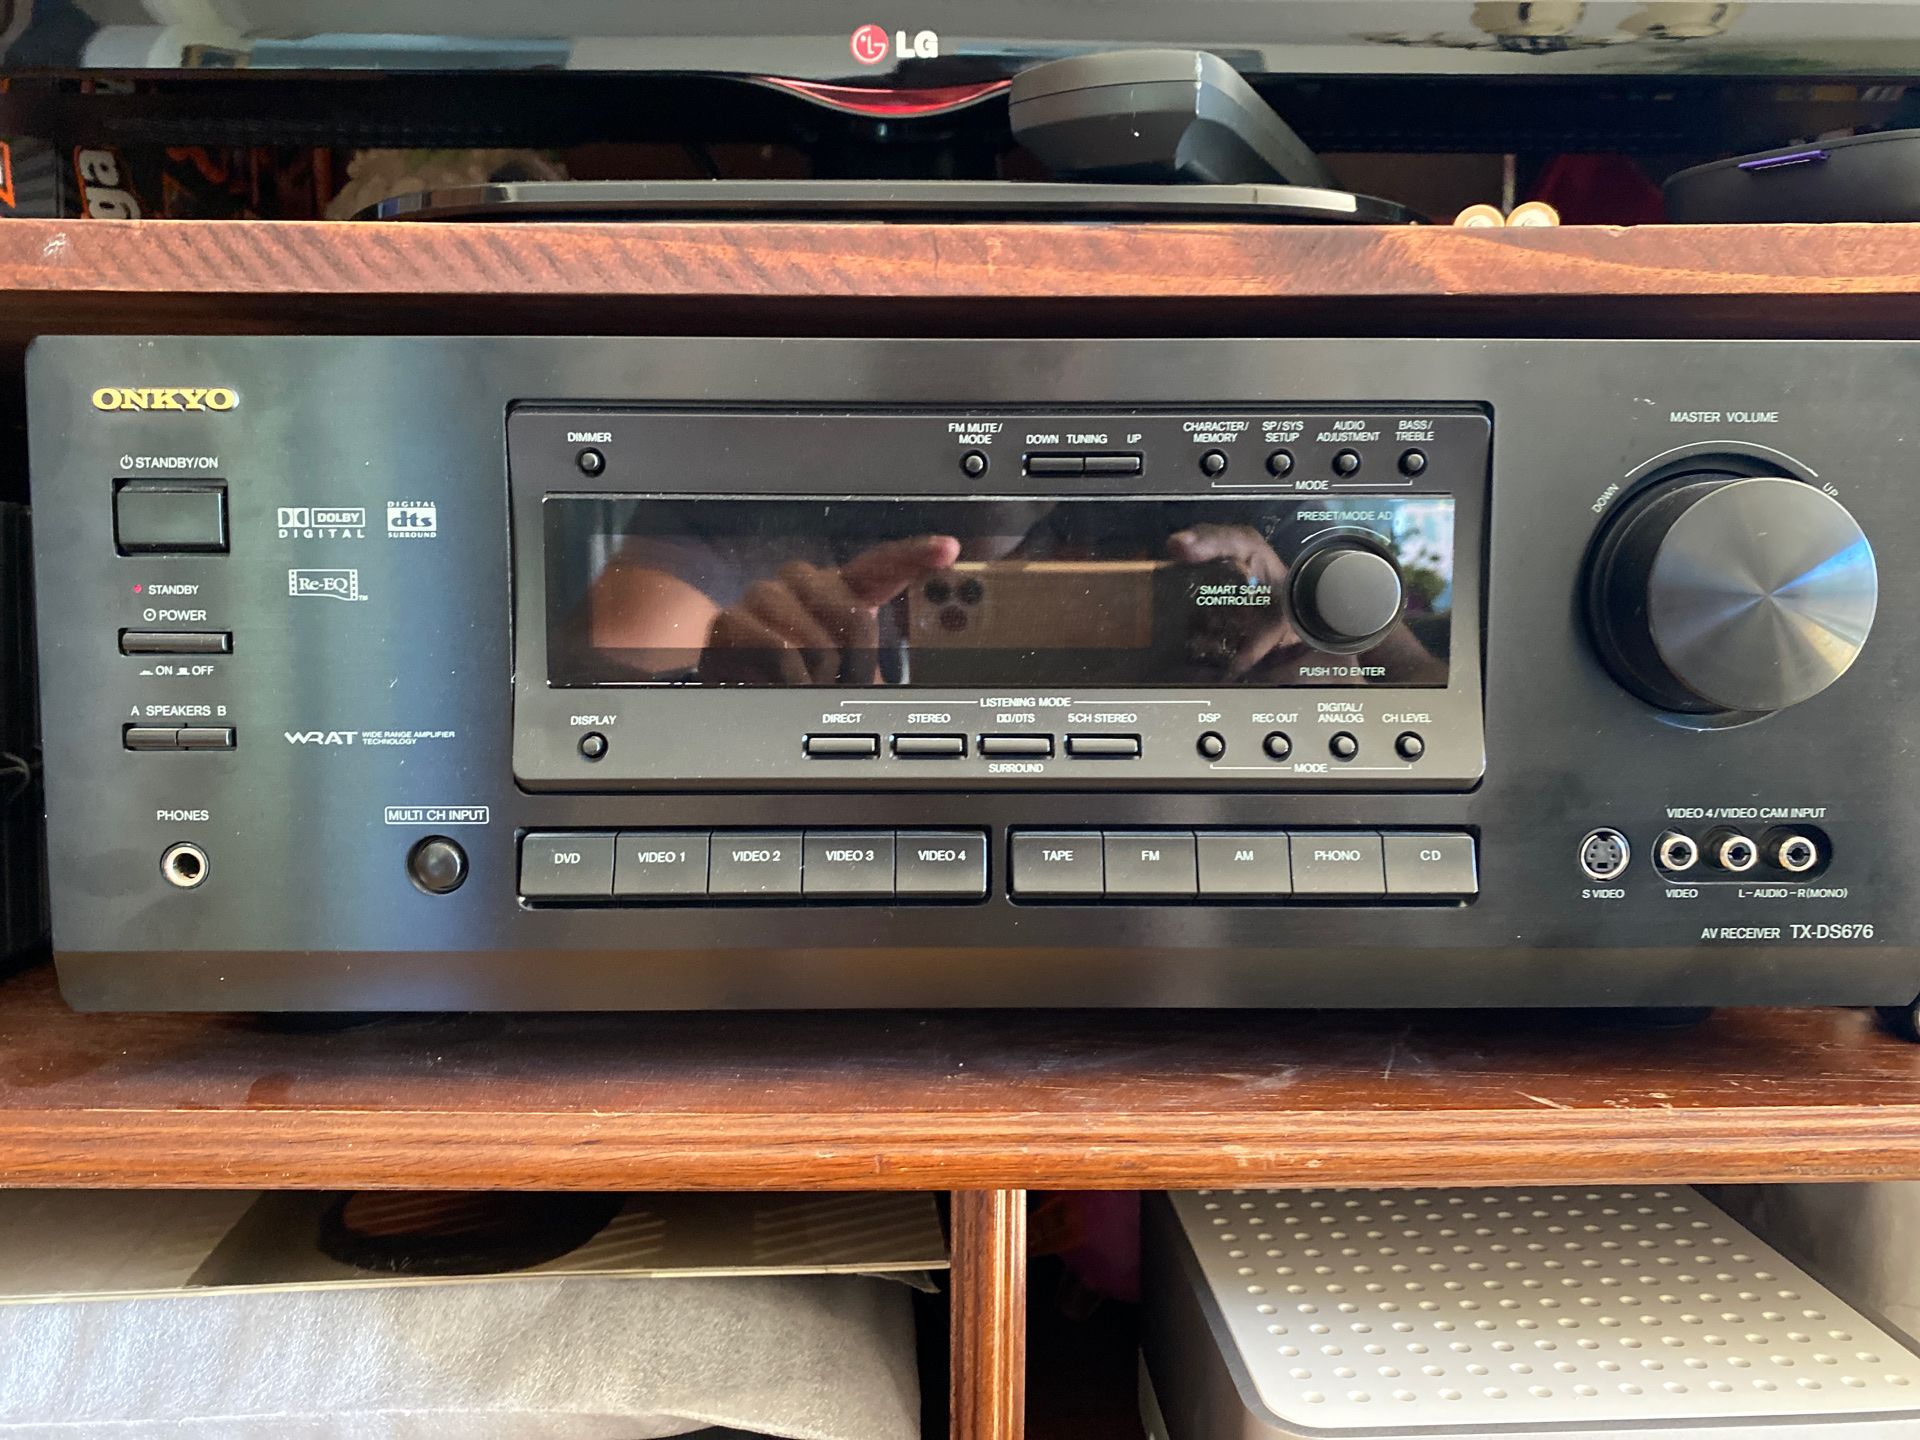 Onkyo Tx-DS676 Stereo Receiver